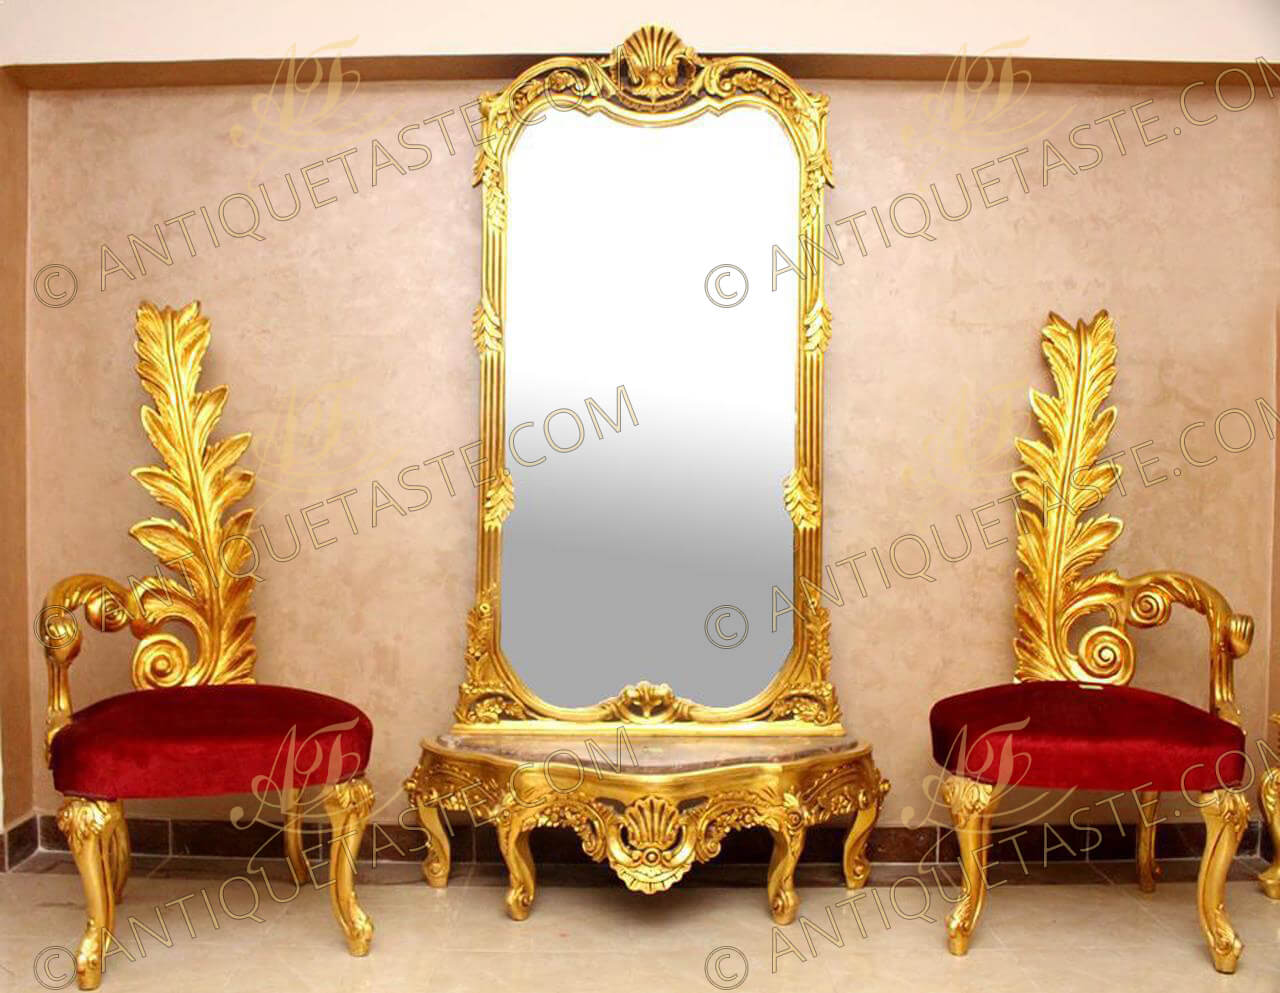 A magnificent French mid 19th century Louis XV style exuberantly carved and 18th K French gold foils gilded entryway console and mirror, The console short table is raised on four scrolled cabriole legs surmounted by scalloped and pierced convex frieze centered by a pierced reserves of seashell amidst C scrolls, blossoming flowers berried foliate continues to the convex sides as well, All below the molded edge fitted marble top harmonized with the frieze shaped border, The gilt wood mirror is also adorned with carvings of pierced C scrolled acanthus leaves and foliates at each side and corner, The large C scrolls and blossoming swaging garland and magnificent pierced sea shells are cresting the wonderful top crown